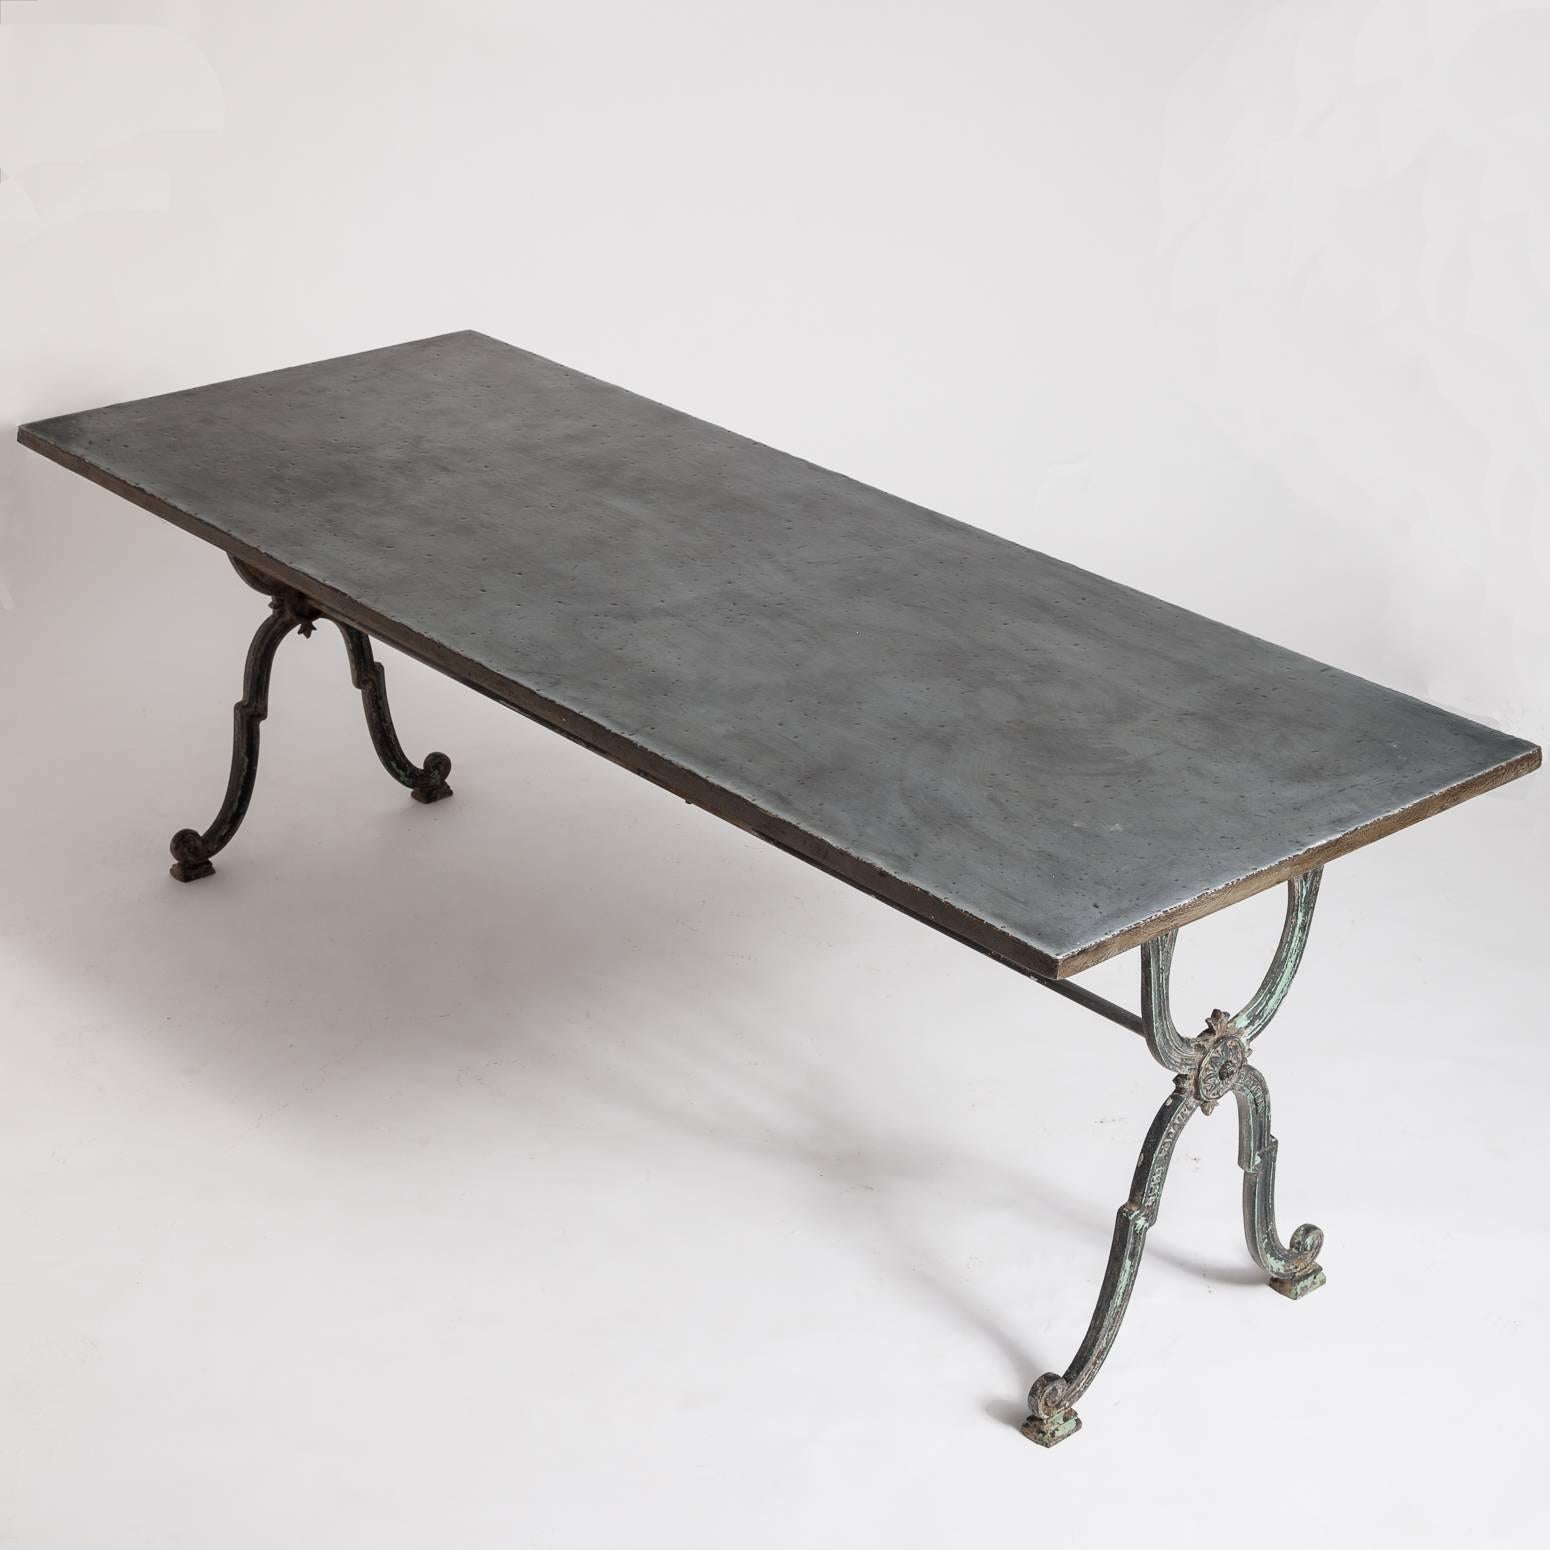 This table from the Provence area has an intricate antique cast iron base marked with the maker’s name, Jean Faraill, Perpignan. Perpignan is a small city in Southwest France, near the Mediterranean coast.  The new wooden top is covered with